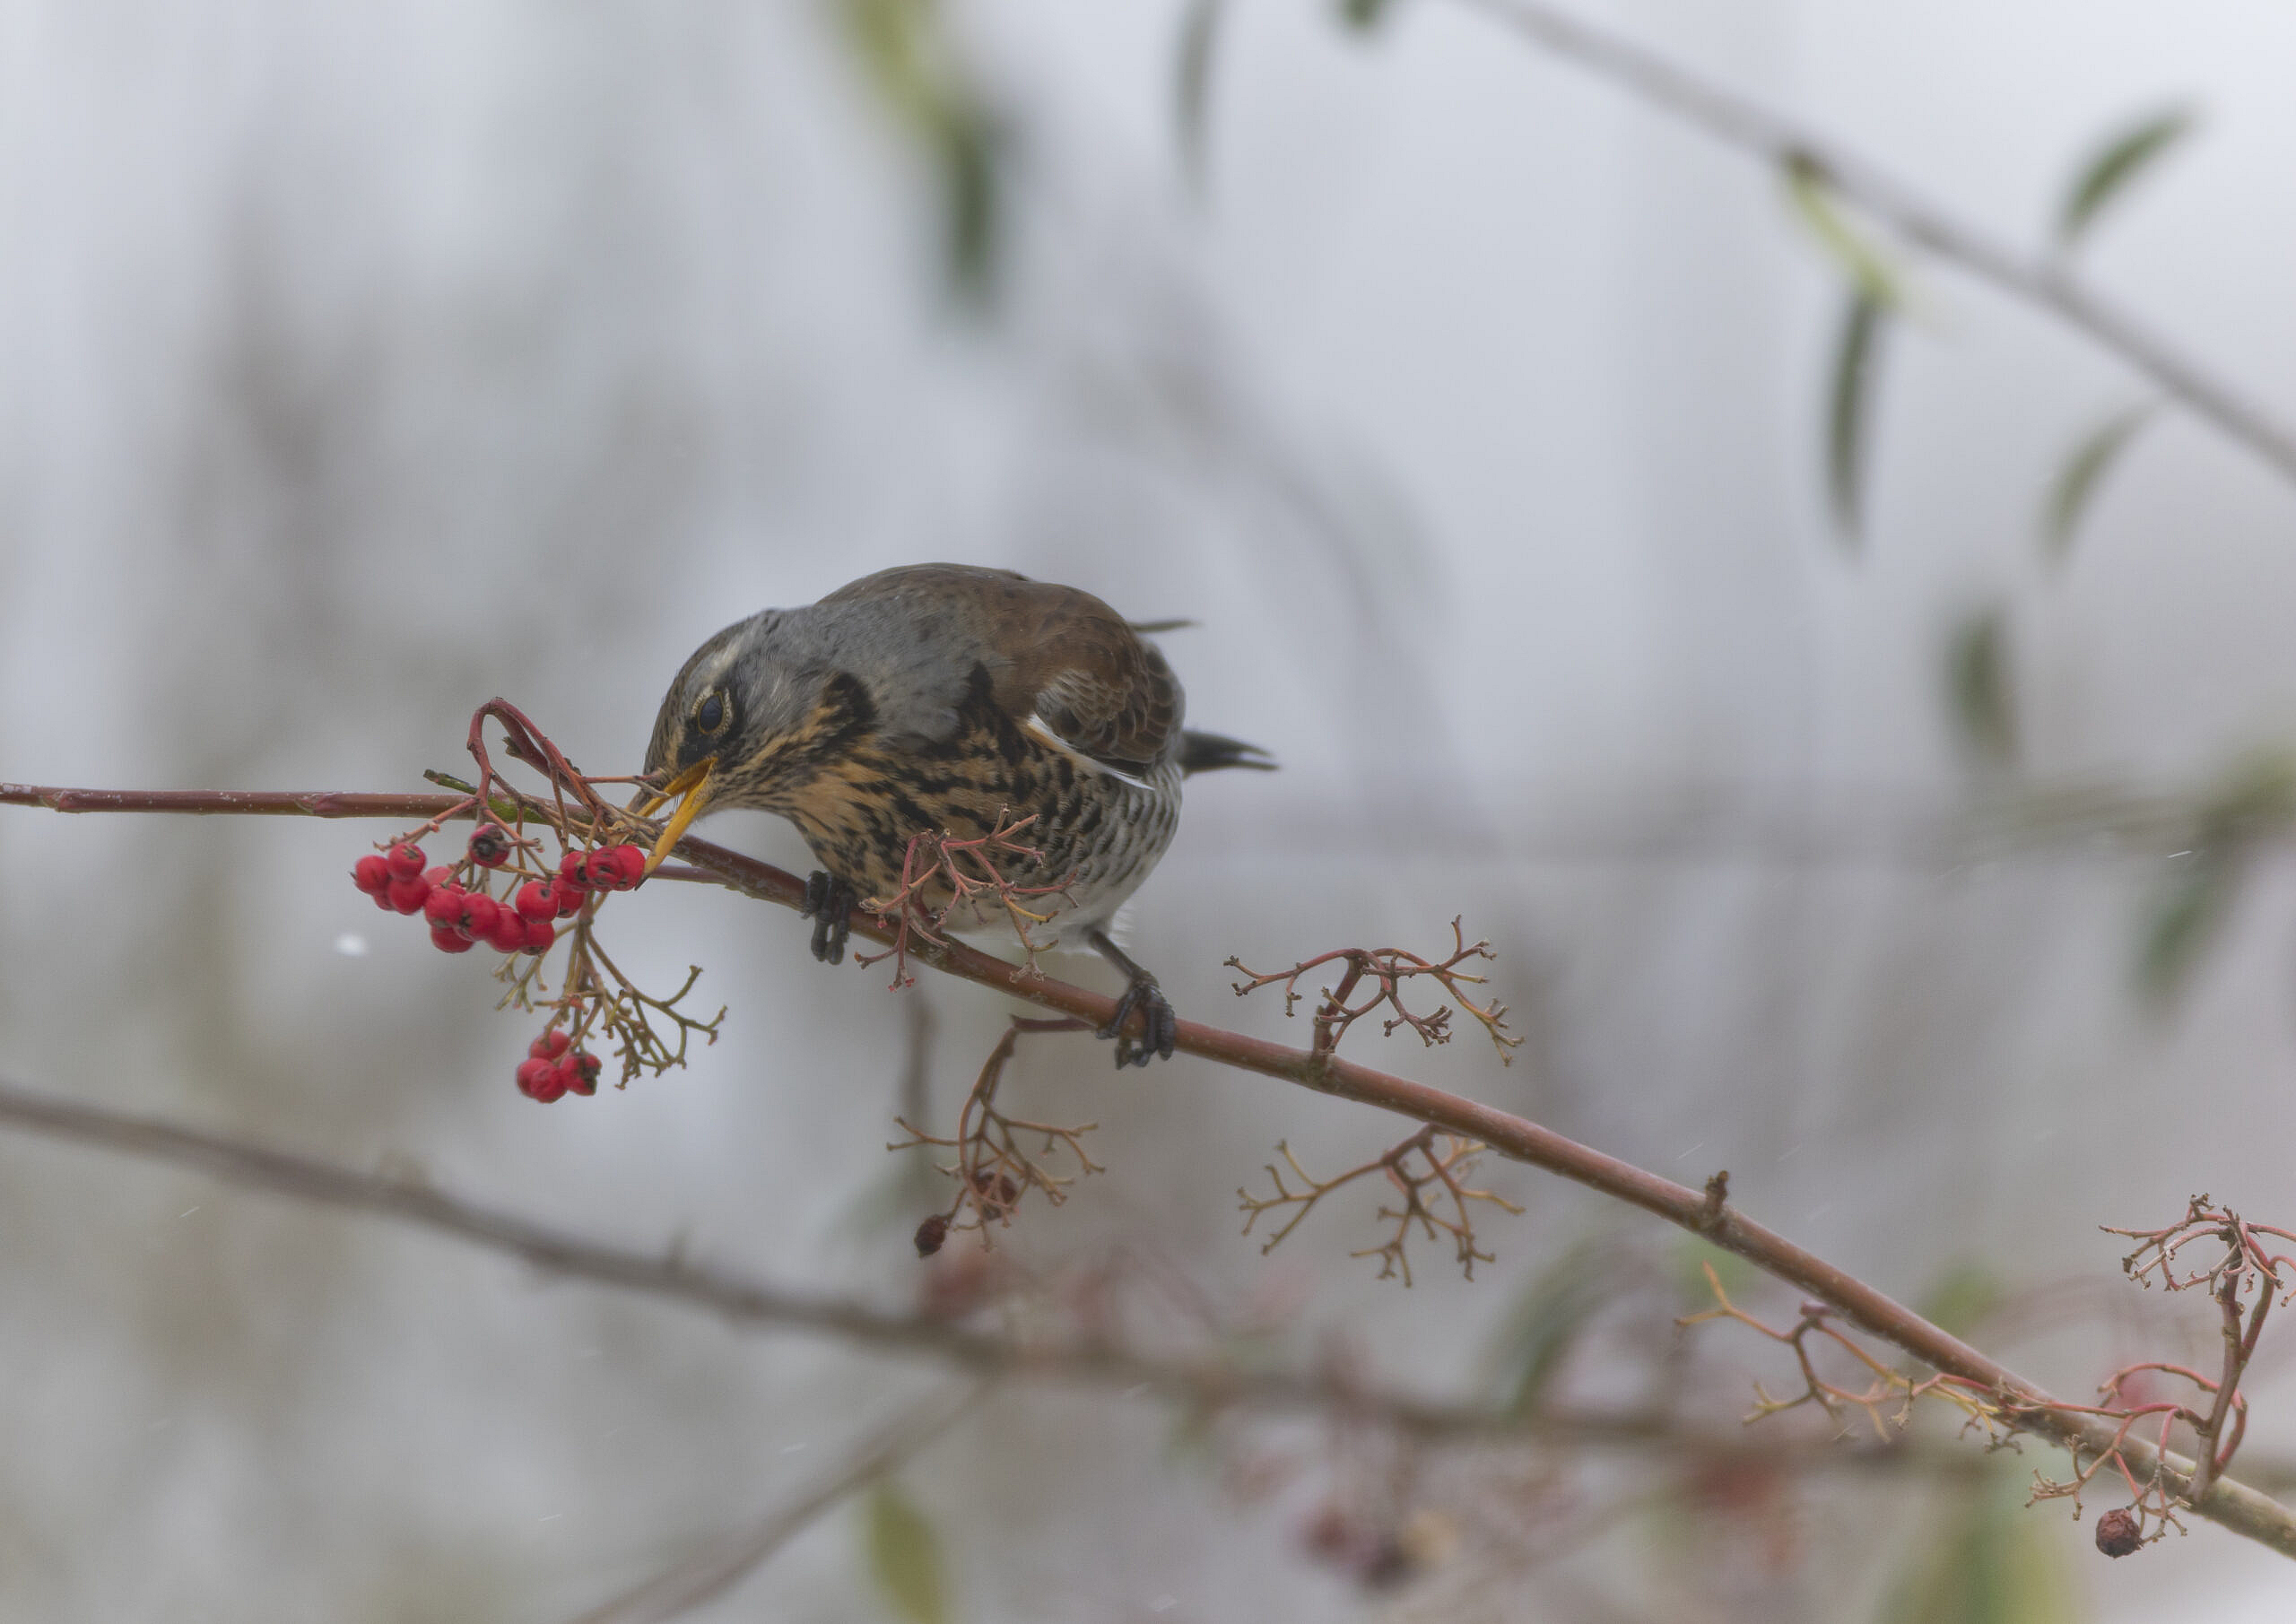 fieldfare eating winter berries - - disappearing soon from a field near you